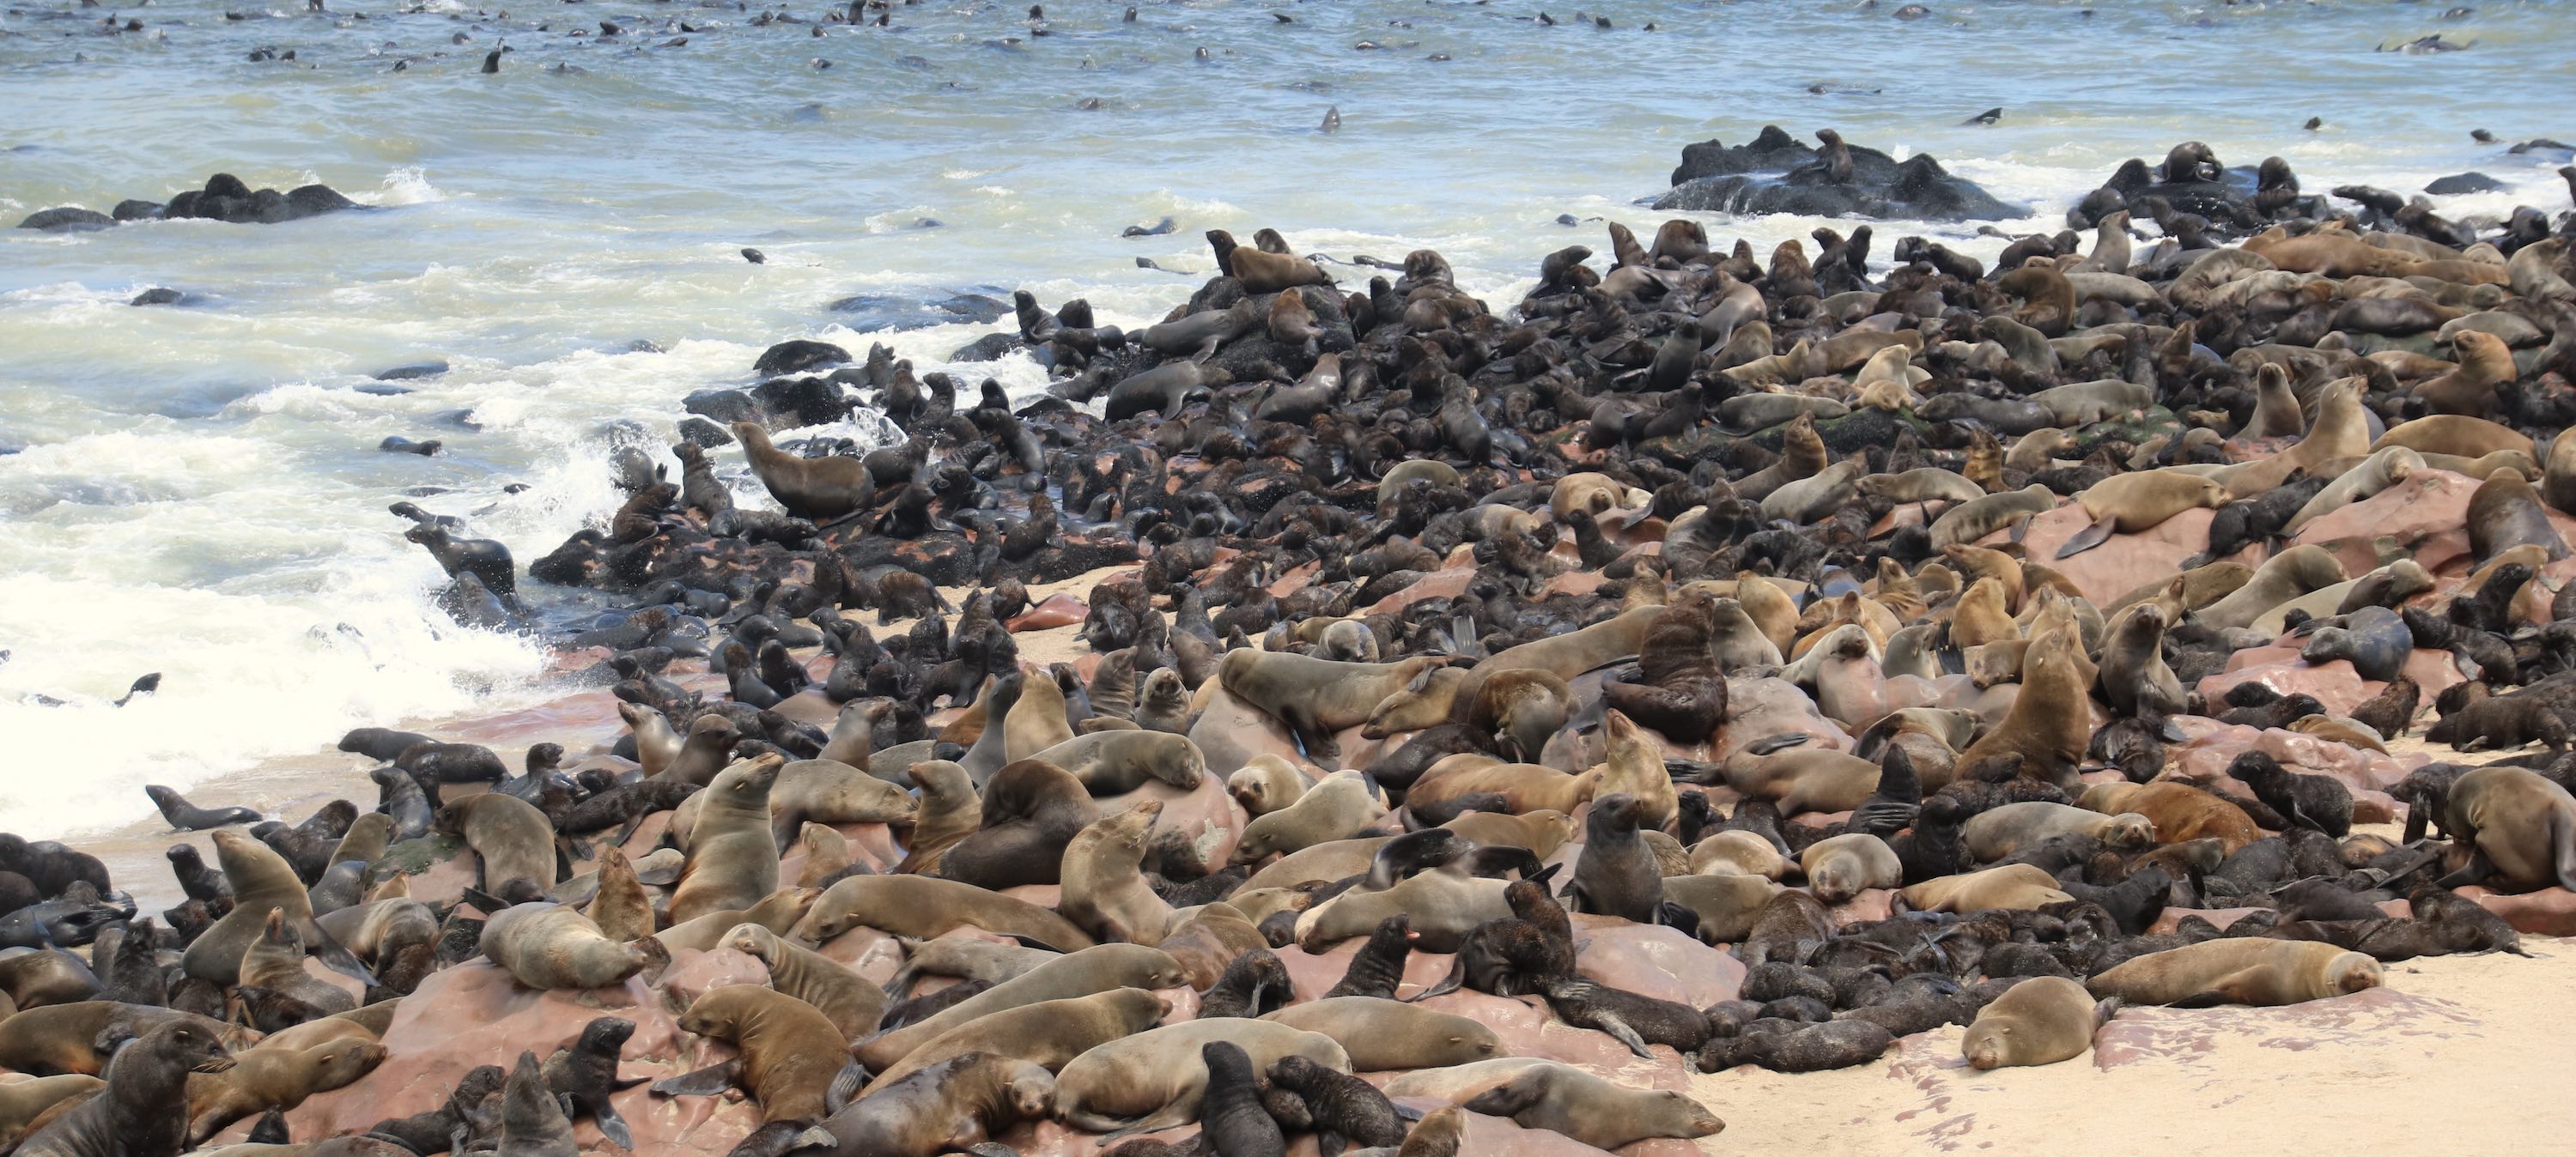 A dense group of several hundred cape fur seals on the beach.